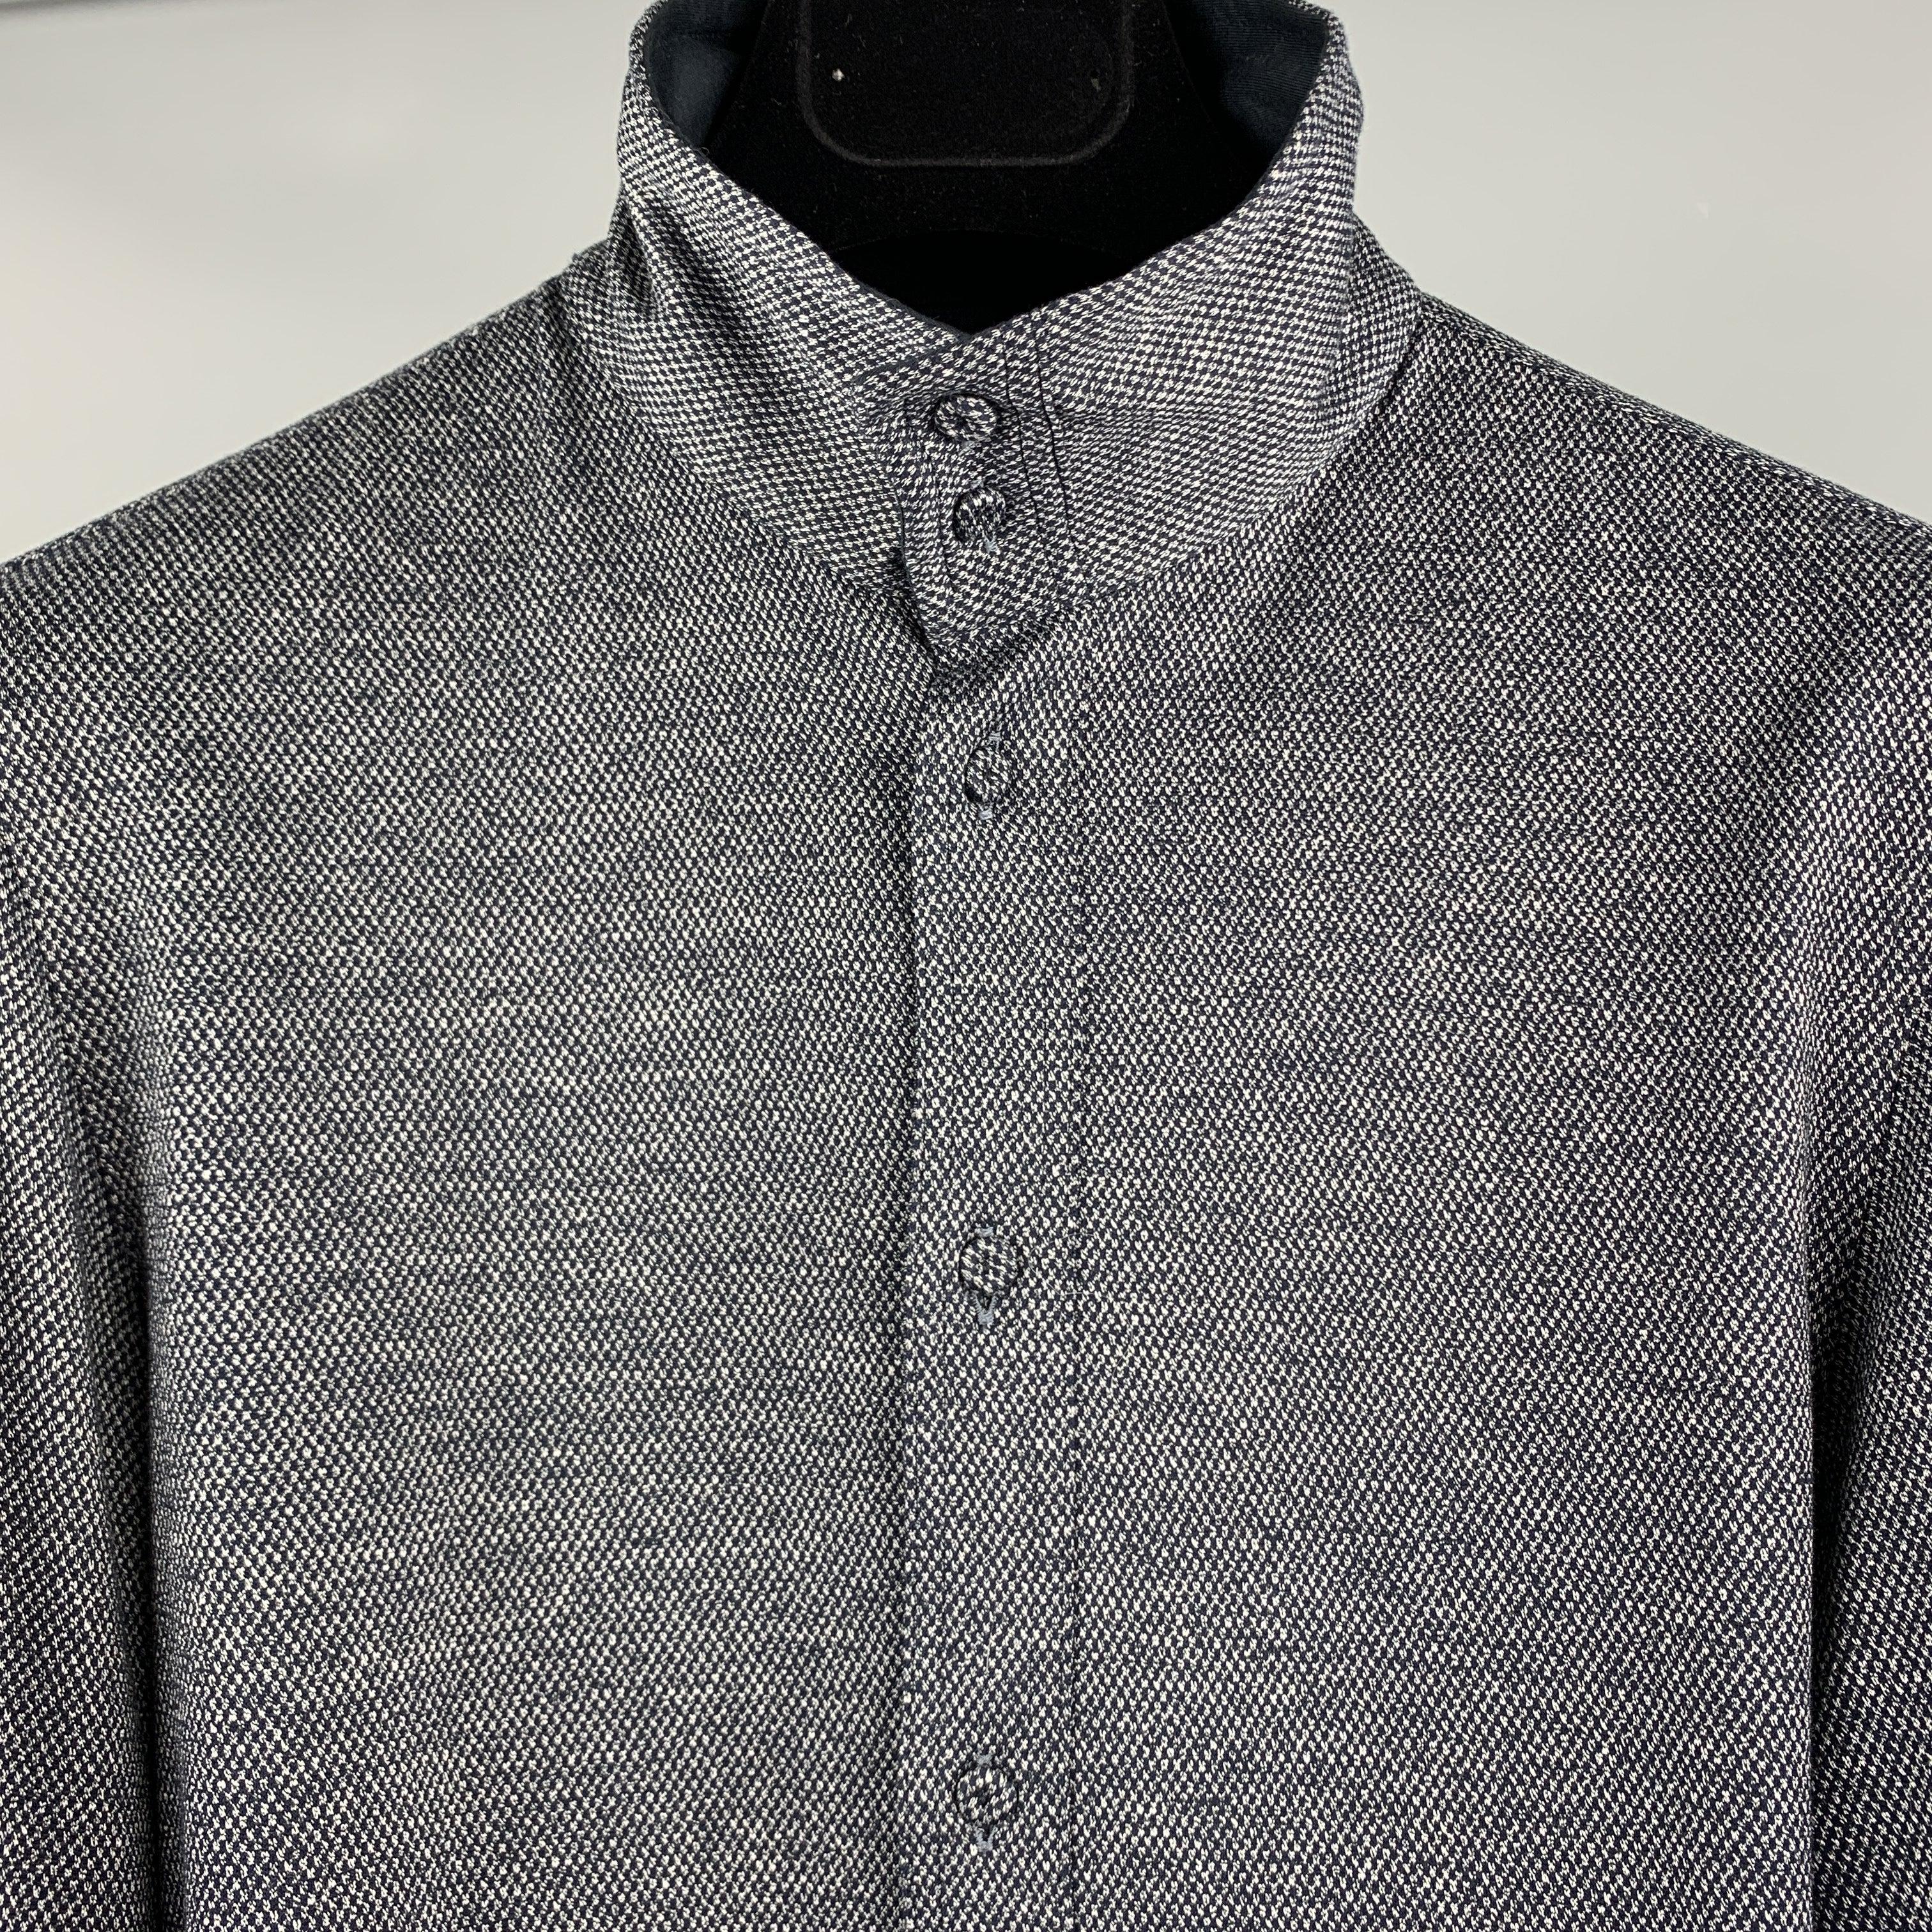 EMPORIO ARMANI Long Sleeve Shirt comes in grey and navy nailhead cotton material, featuring a wired high collar, and buttoned front and cuffs.
Excellent
Pre-Owned Condition. 

Marked:   38 / 15 

Measurements: 
 
Shoulder: 16 inches 
Chest: 36